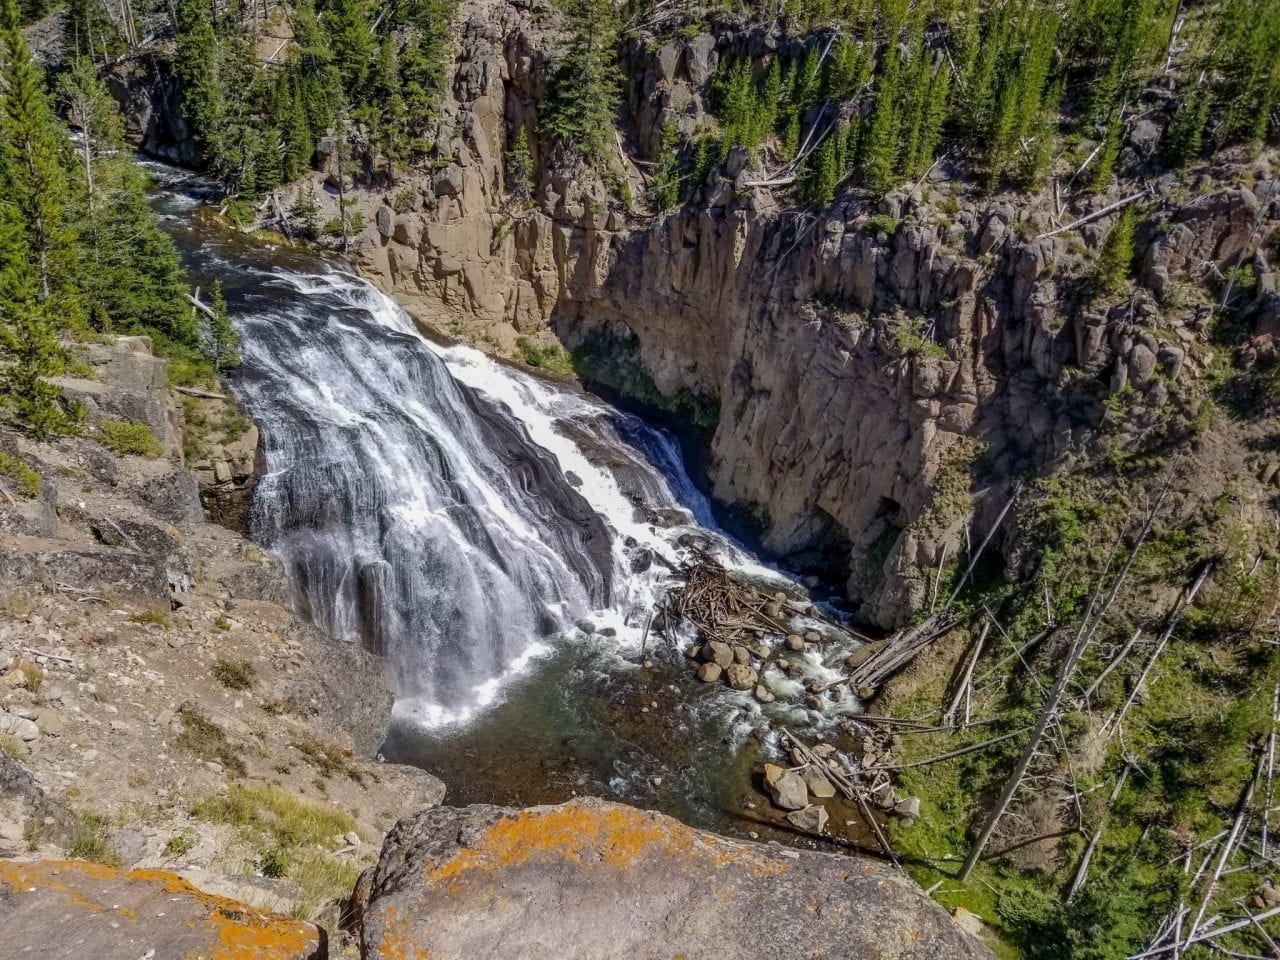 View of Gibbon Falls from the viewpoint on Hwy 89